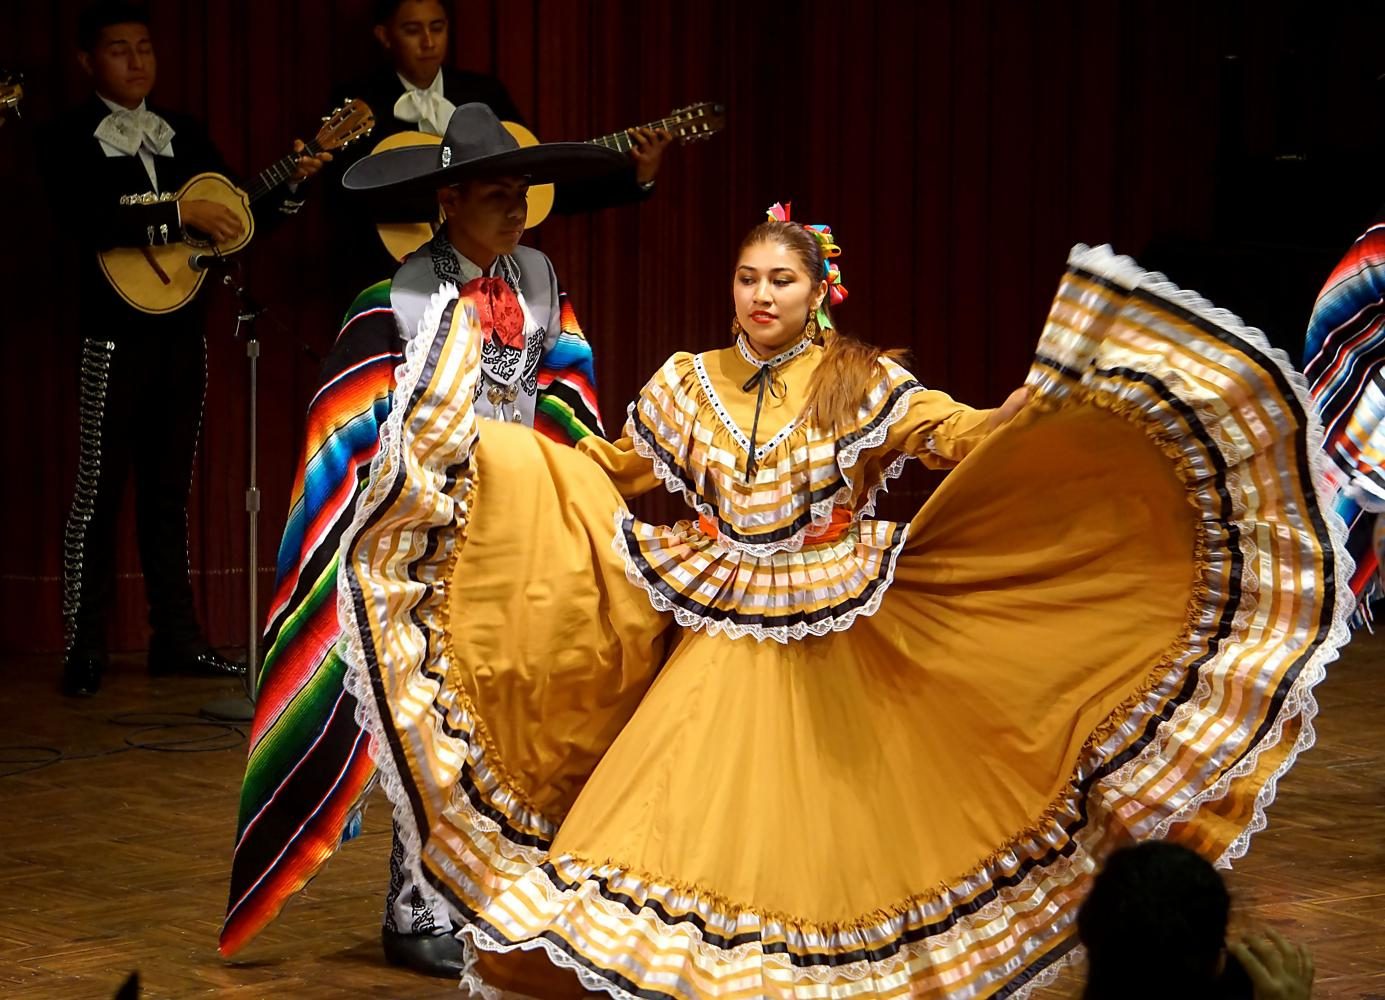 Alejandro Munive, 16, high school student (on the left) dancing a Son called, El Gavilan with his dance partner Janet Velazquez, 19, undecided major during the Mariachi Music and Folklórico Dance concert in the Haag Recital Hall on Thursday, May 18. Photo credit: Selvin Rodas